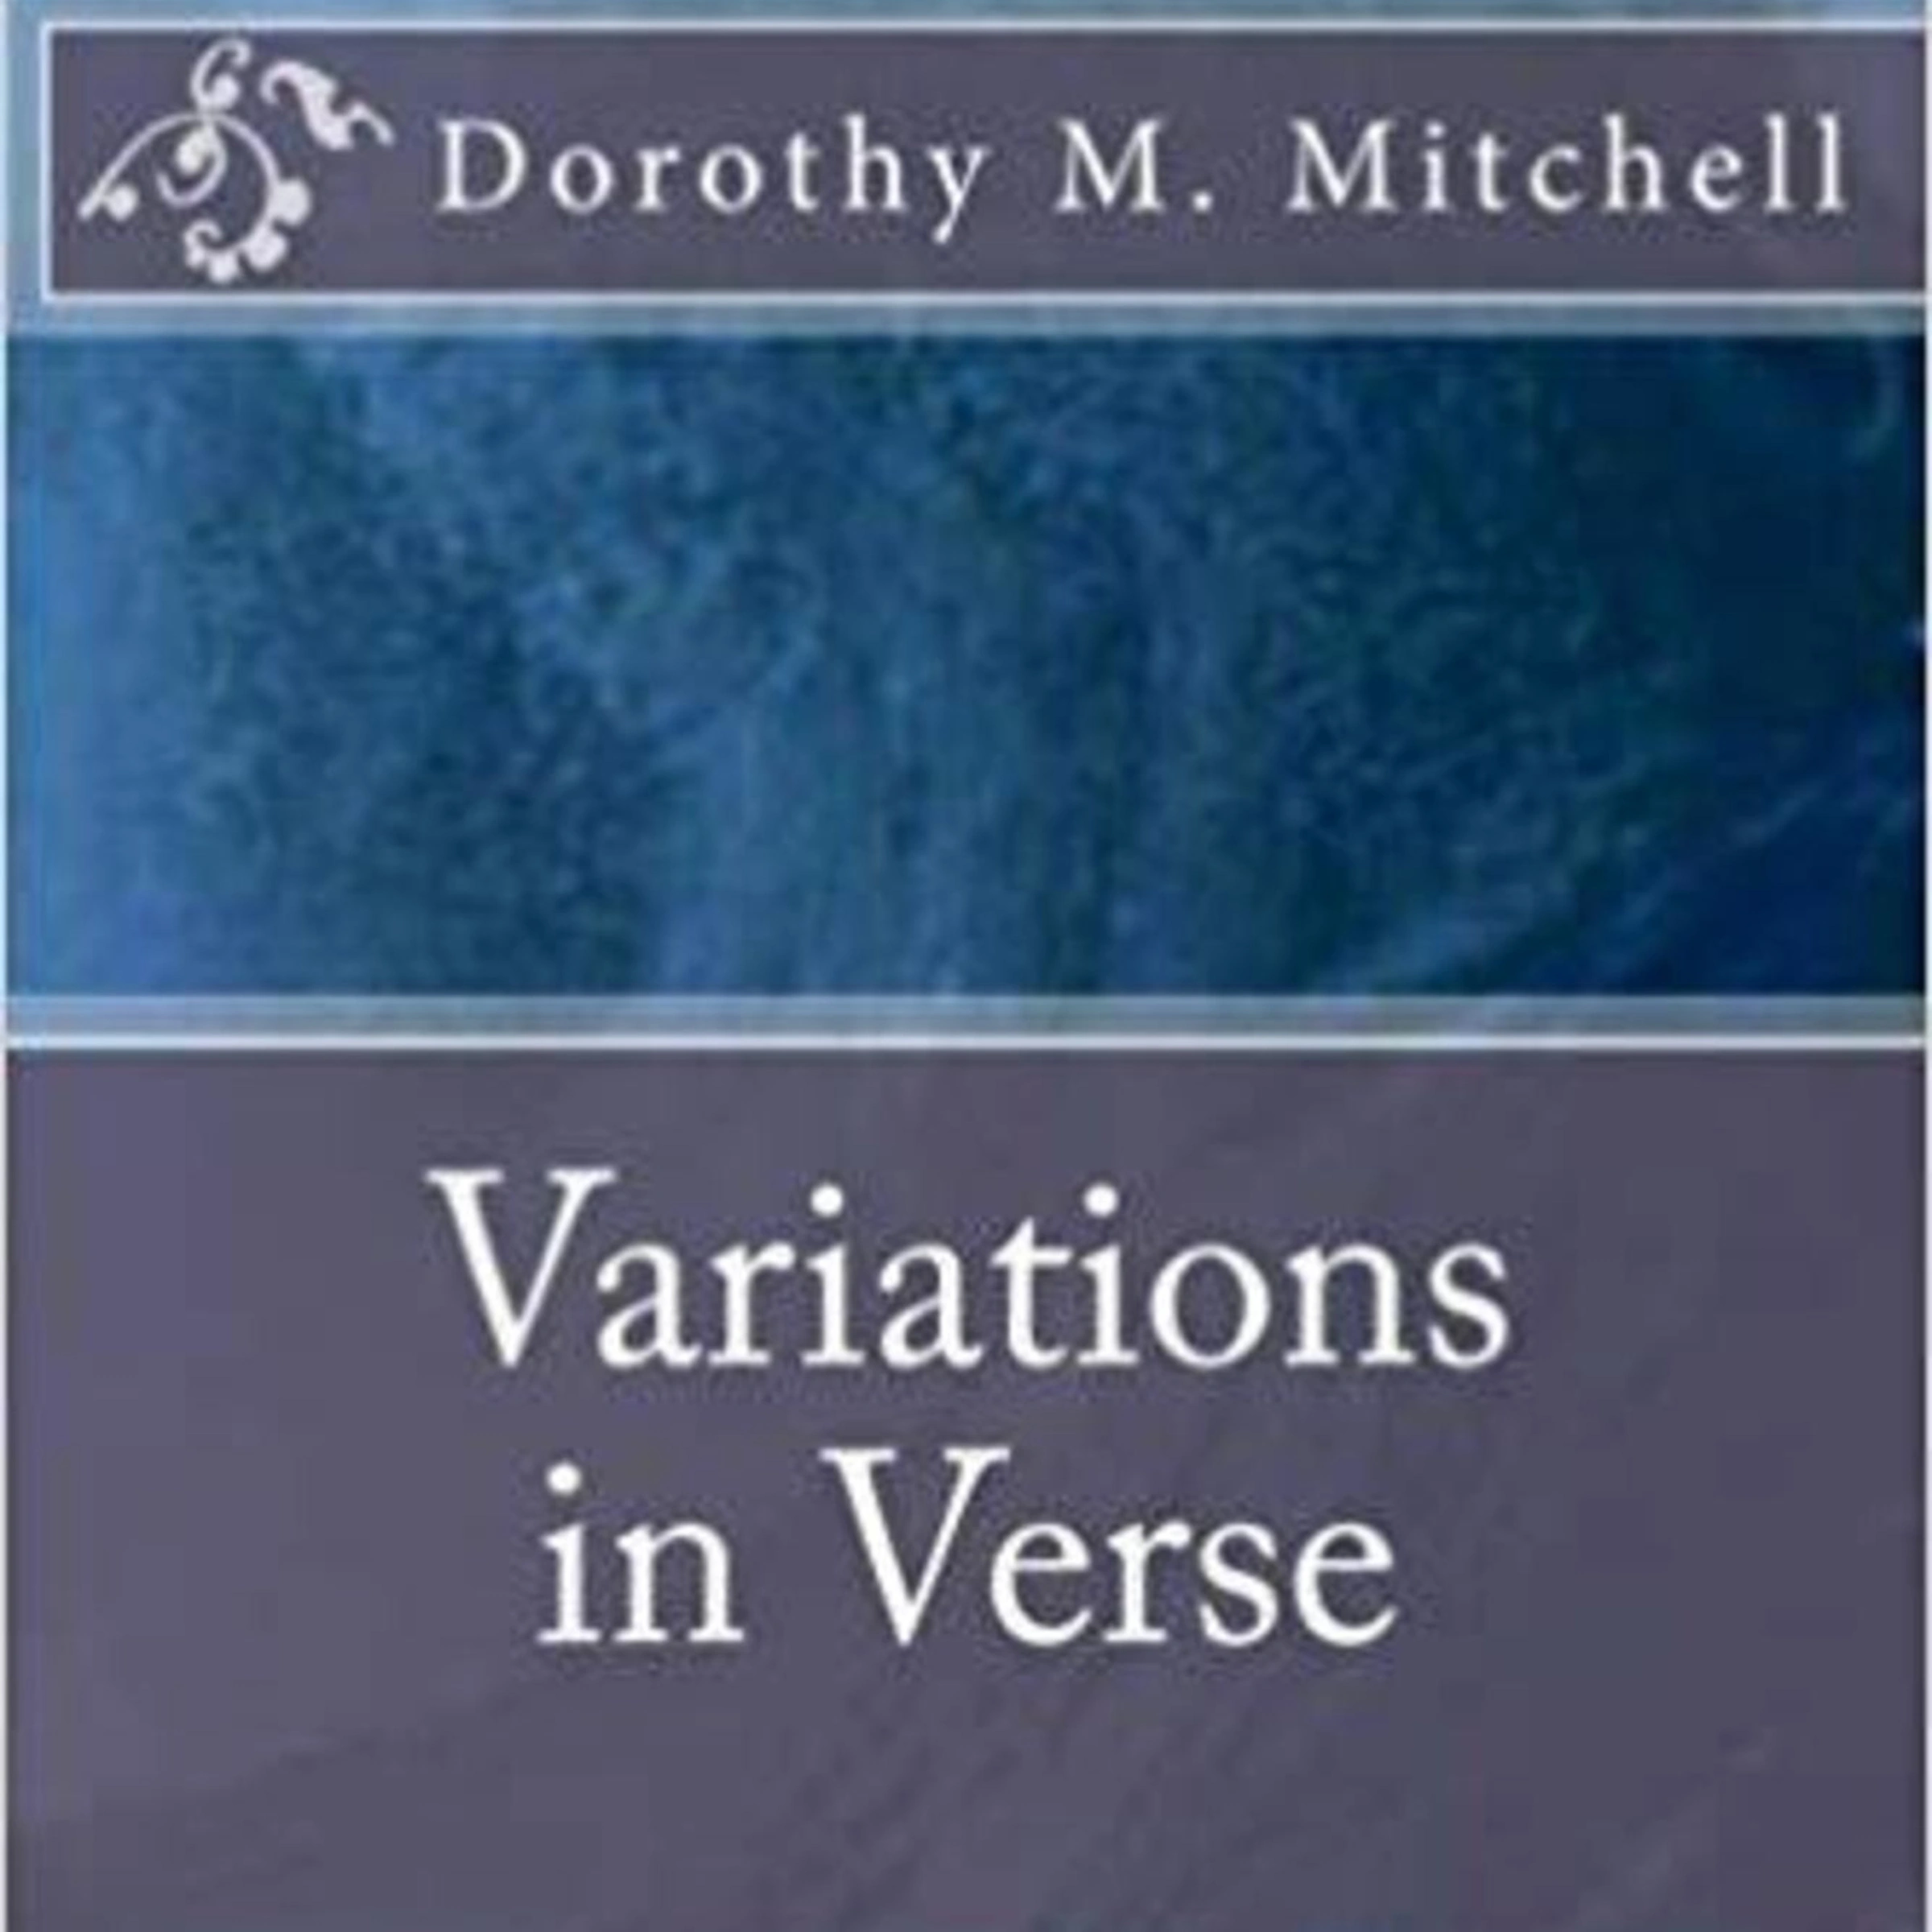 Variations in Verse Audiobook by Dorothy M. Mitchell